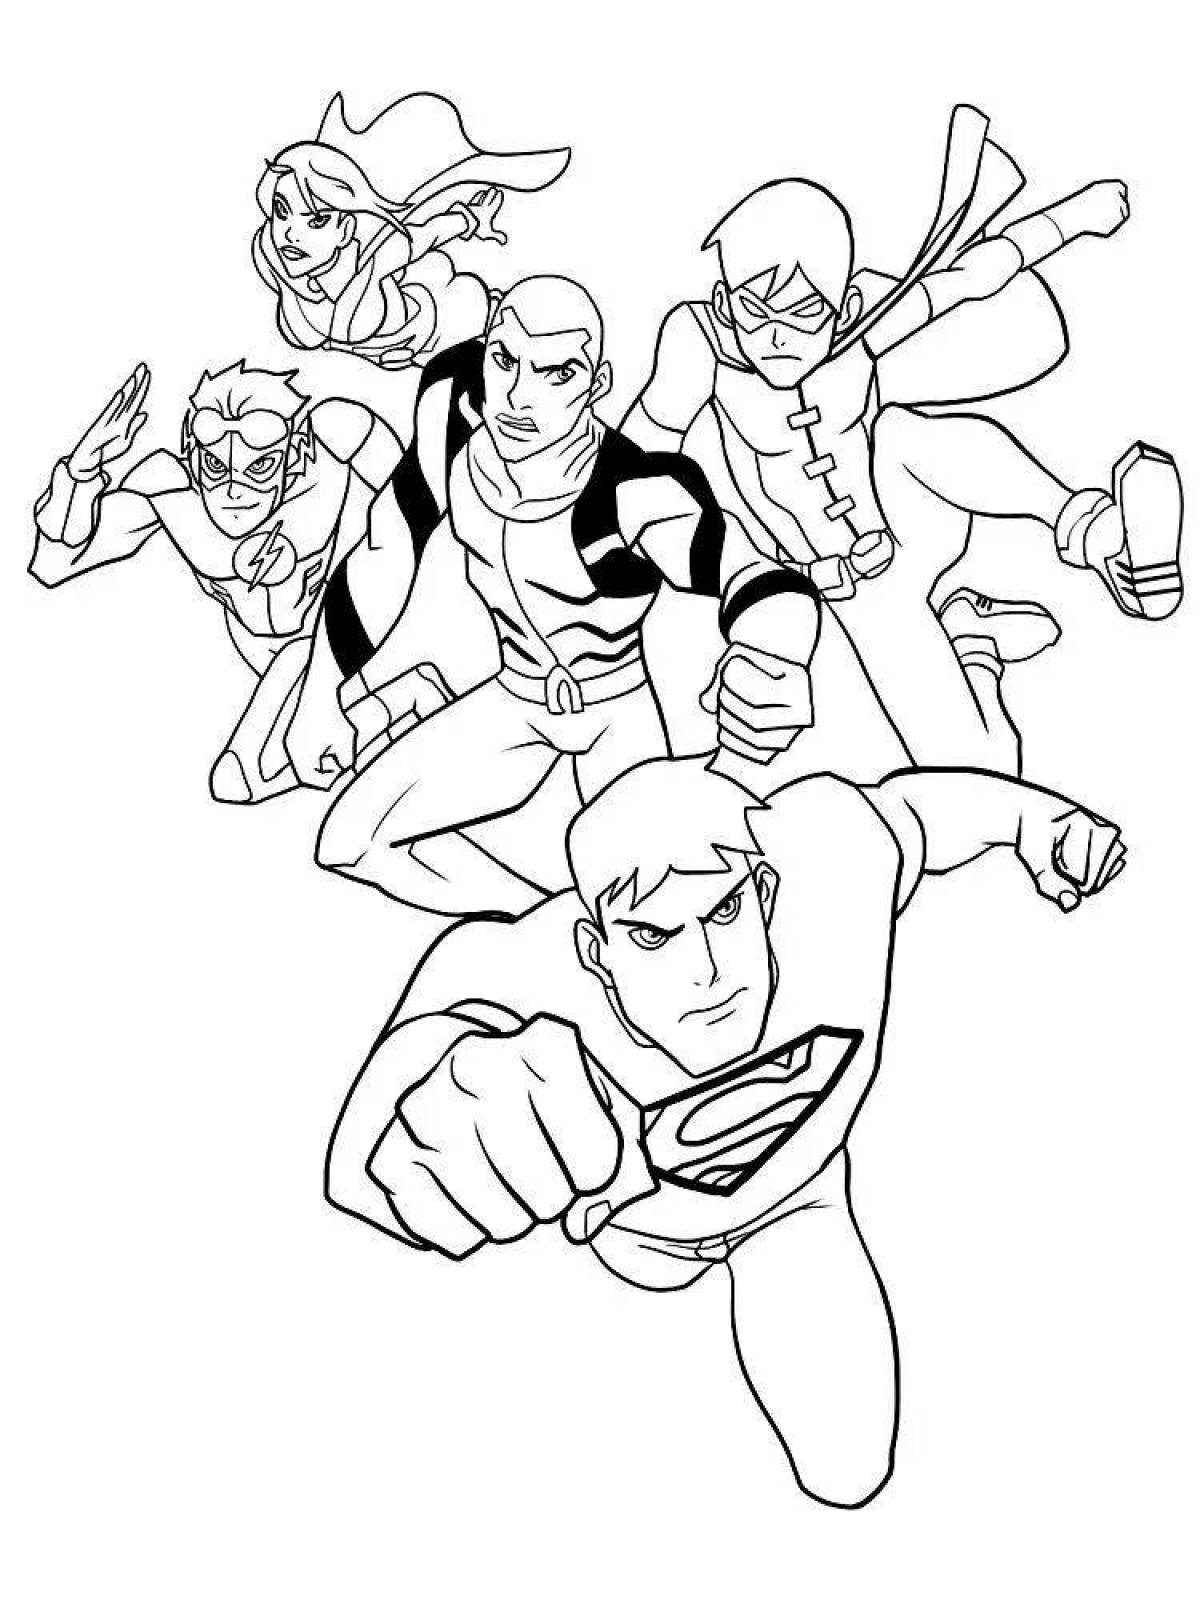 Intriguing super strikers coloring book